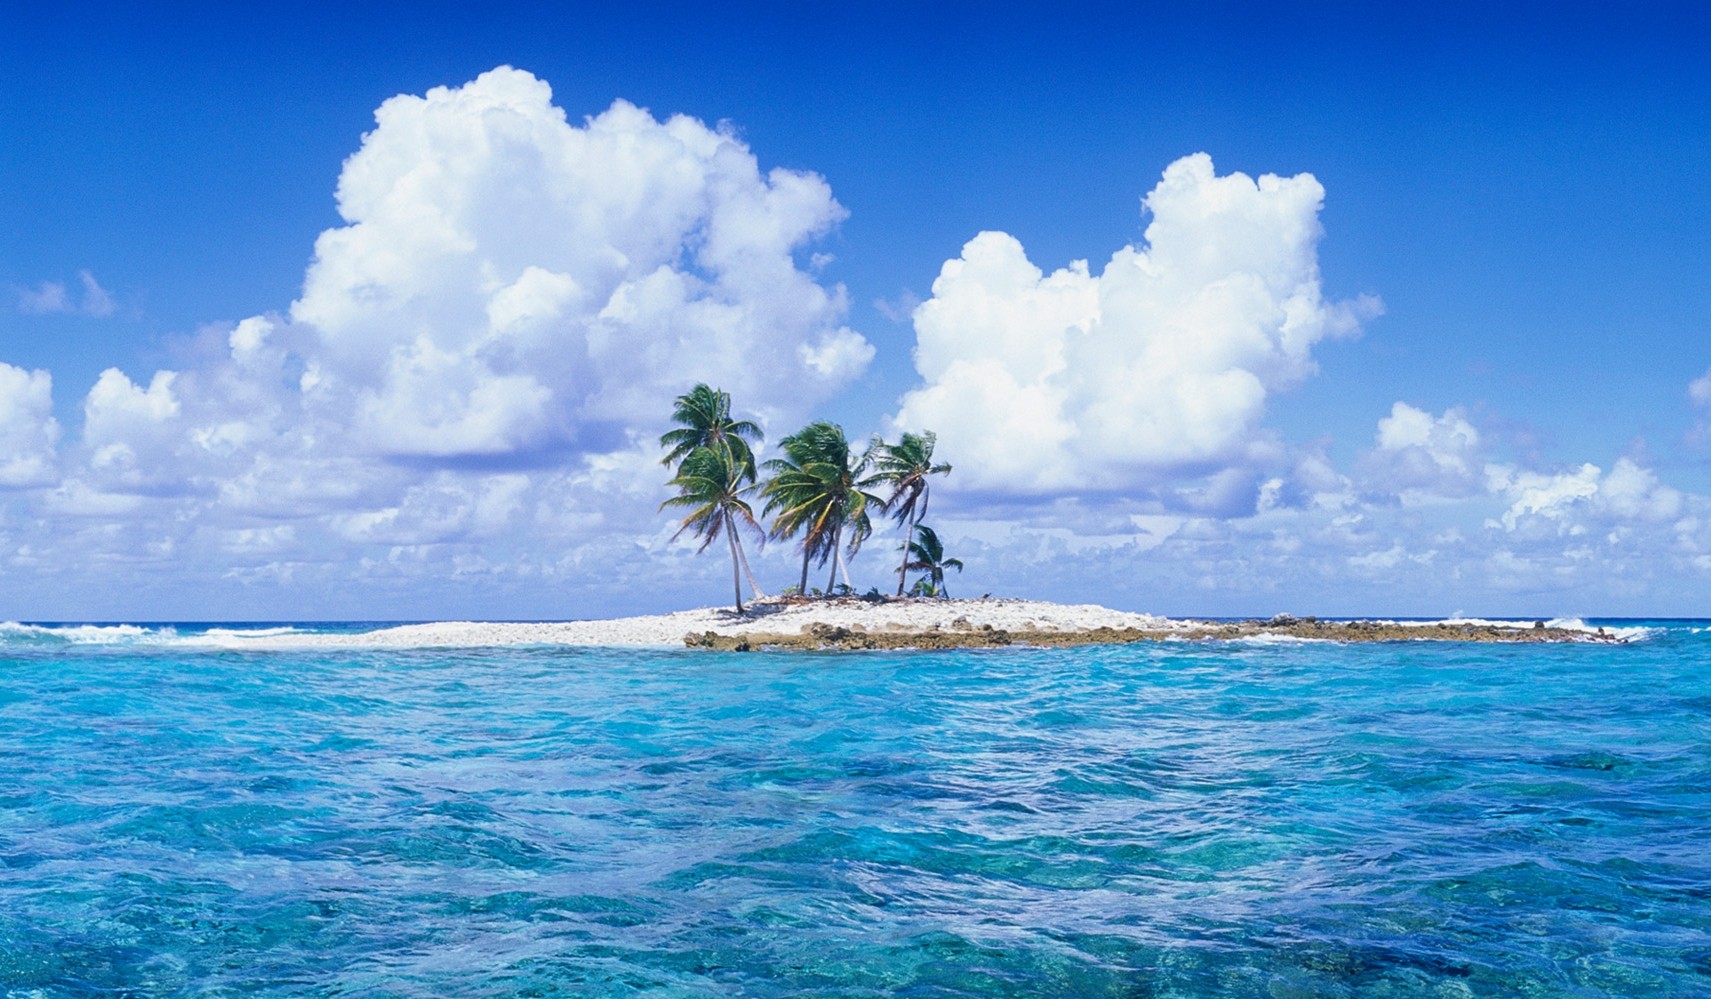 General 1711x999 tropical atols sea clouds beach water nature landscape palm trees sky